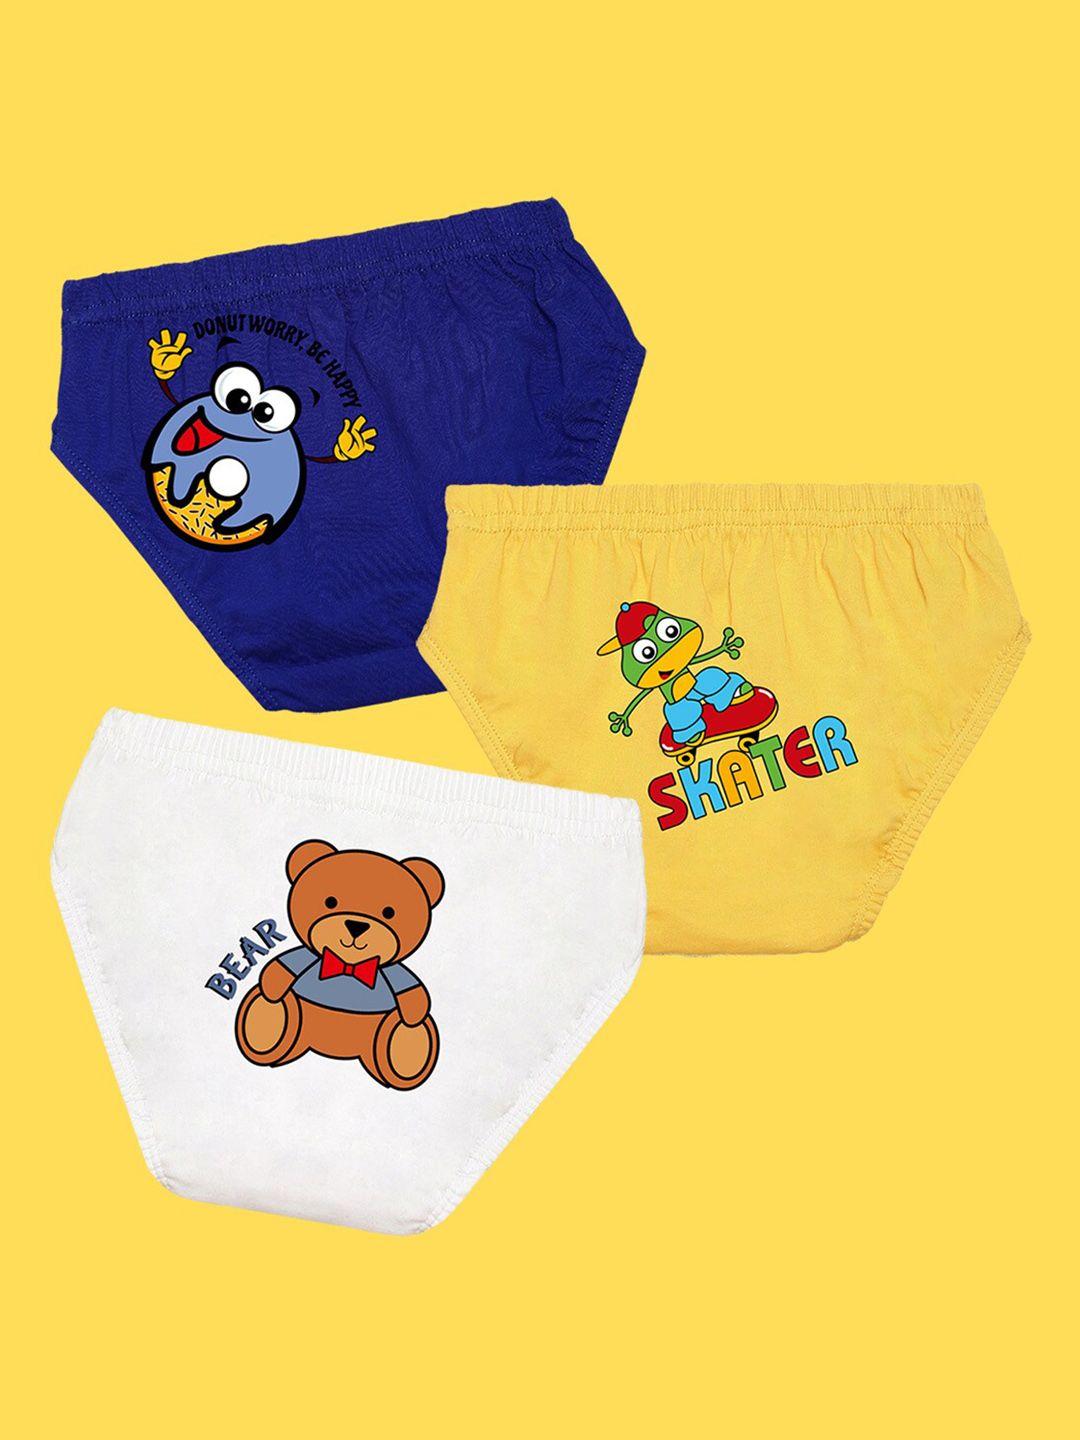 nusyl boys pack of 3 blue,yellow,white printed briefs